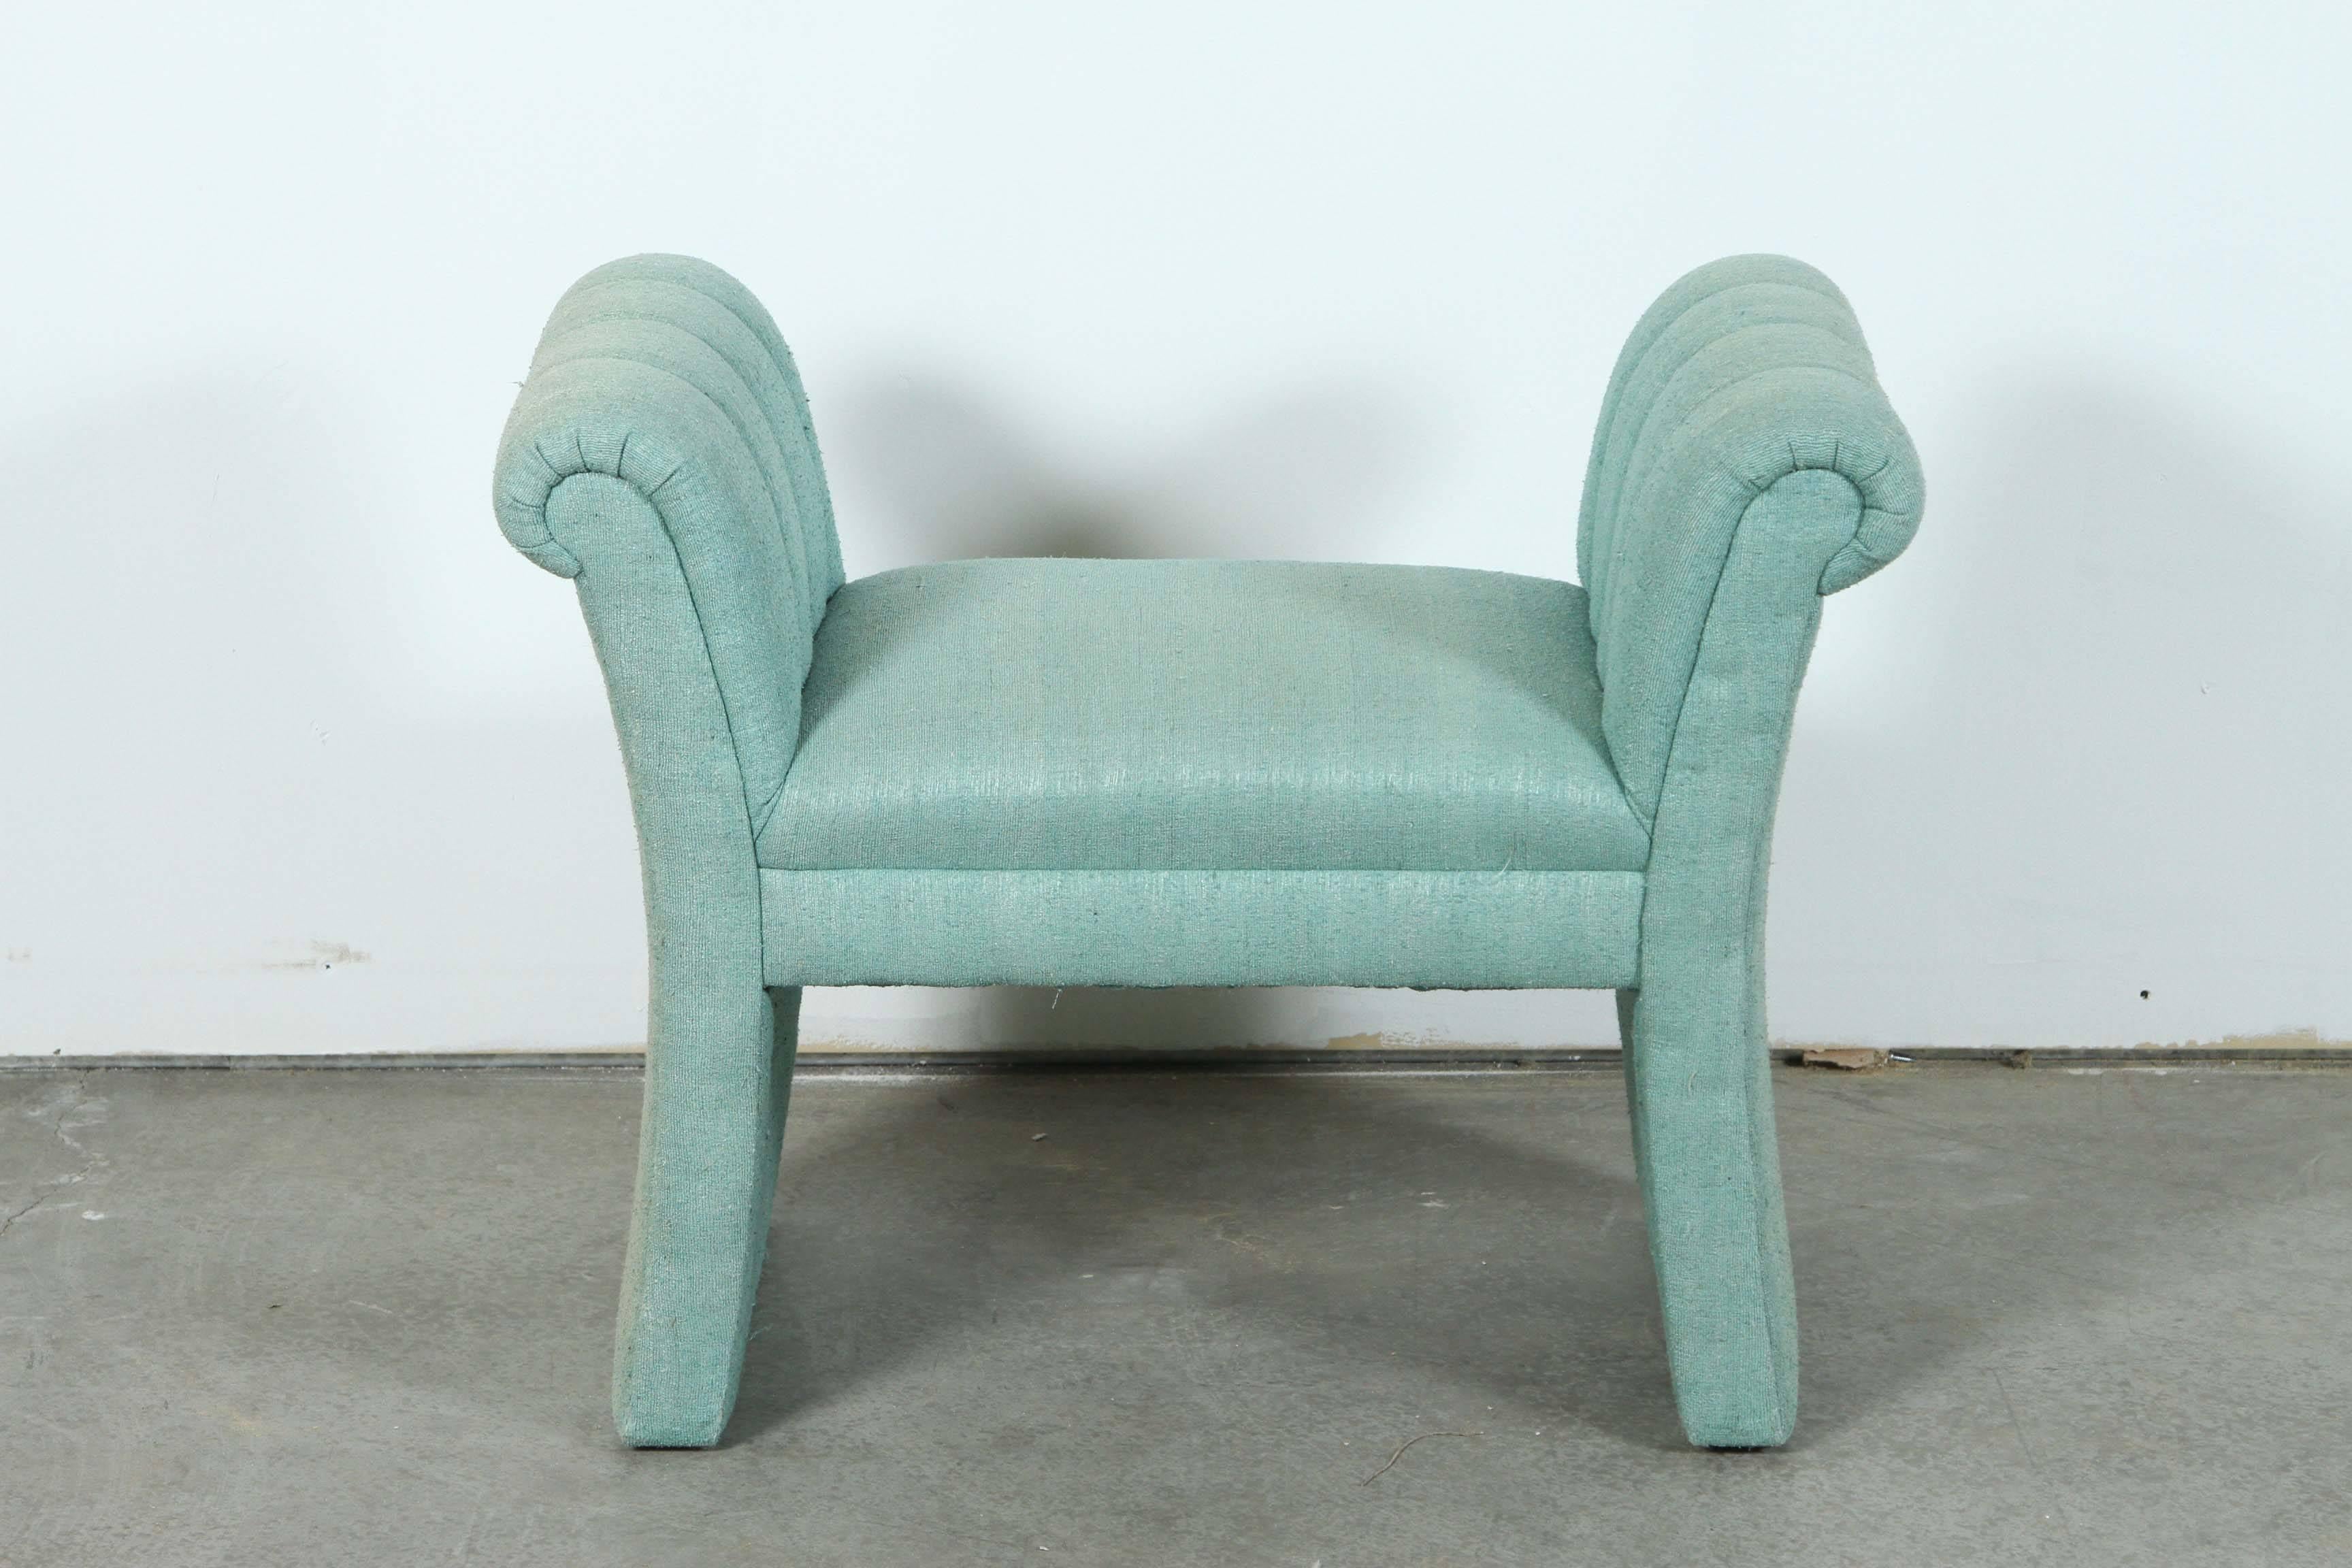 Hollywood Regency bench with channel arms by Steve Chase. 
The bench retains its original teal fabric upholstery.
There is slight fading which is consistent throughout.